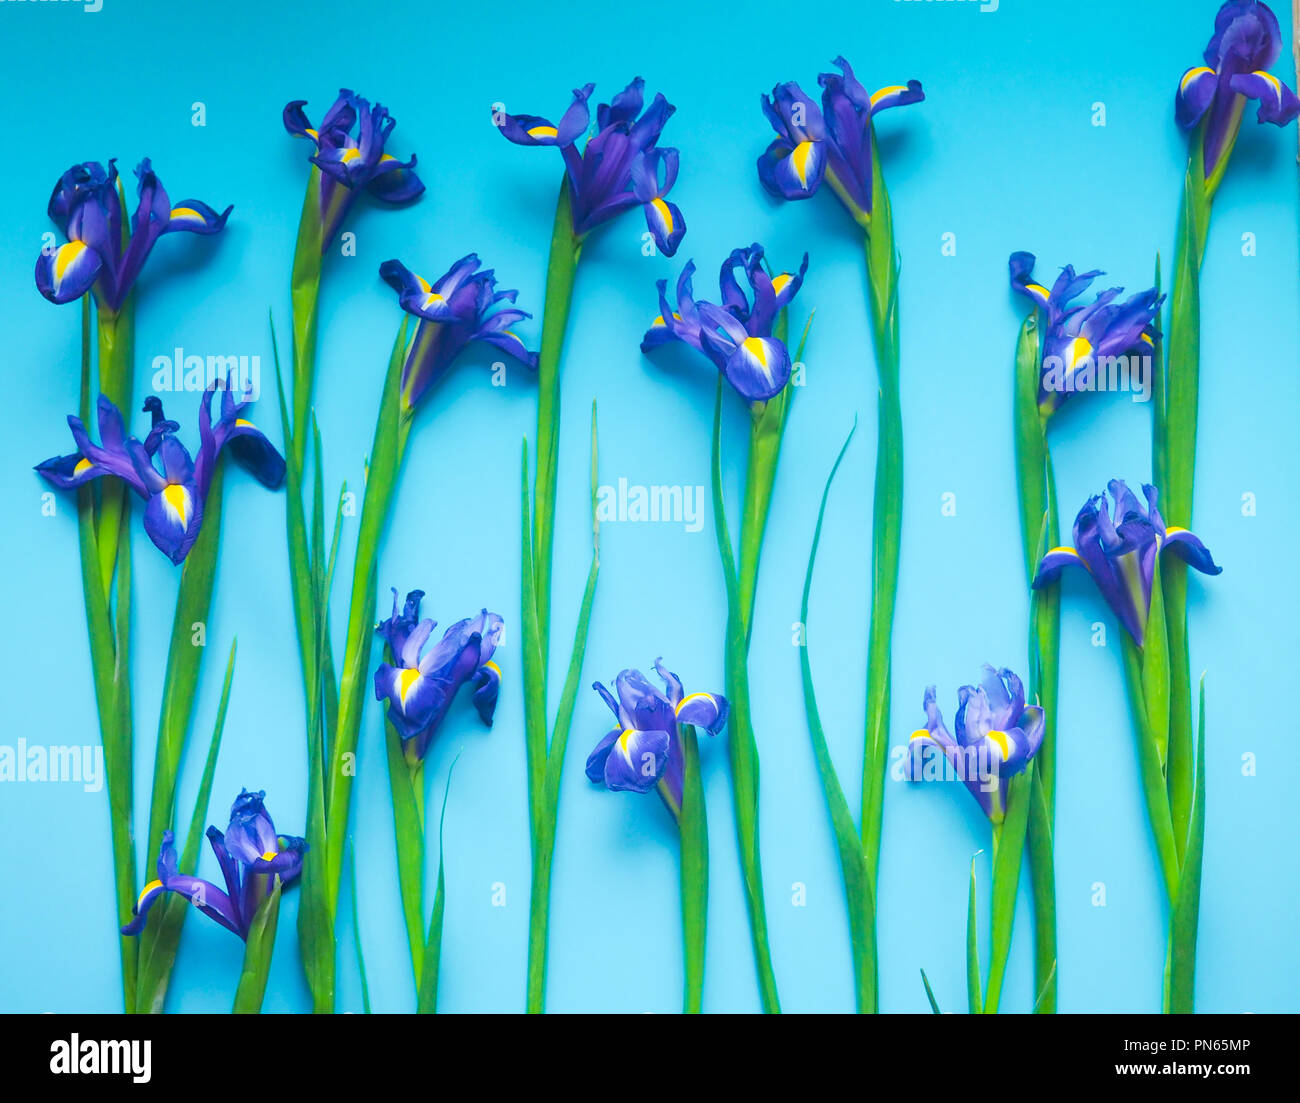 Beautiful iris flowers on a blue background, celebration, greeting card, space for text. Stock Photo